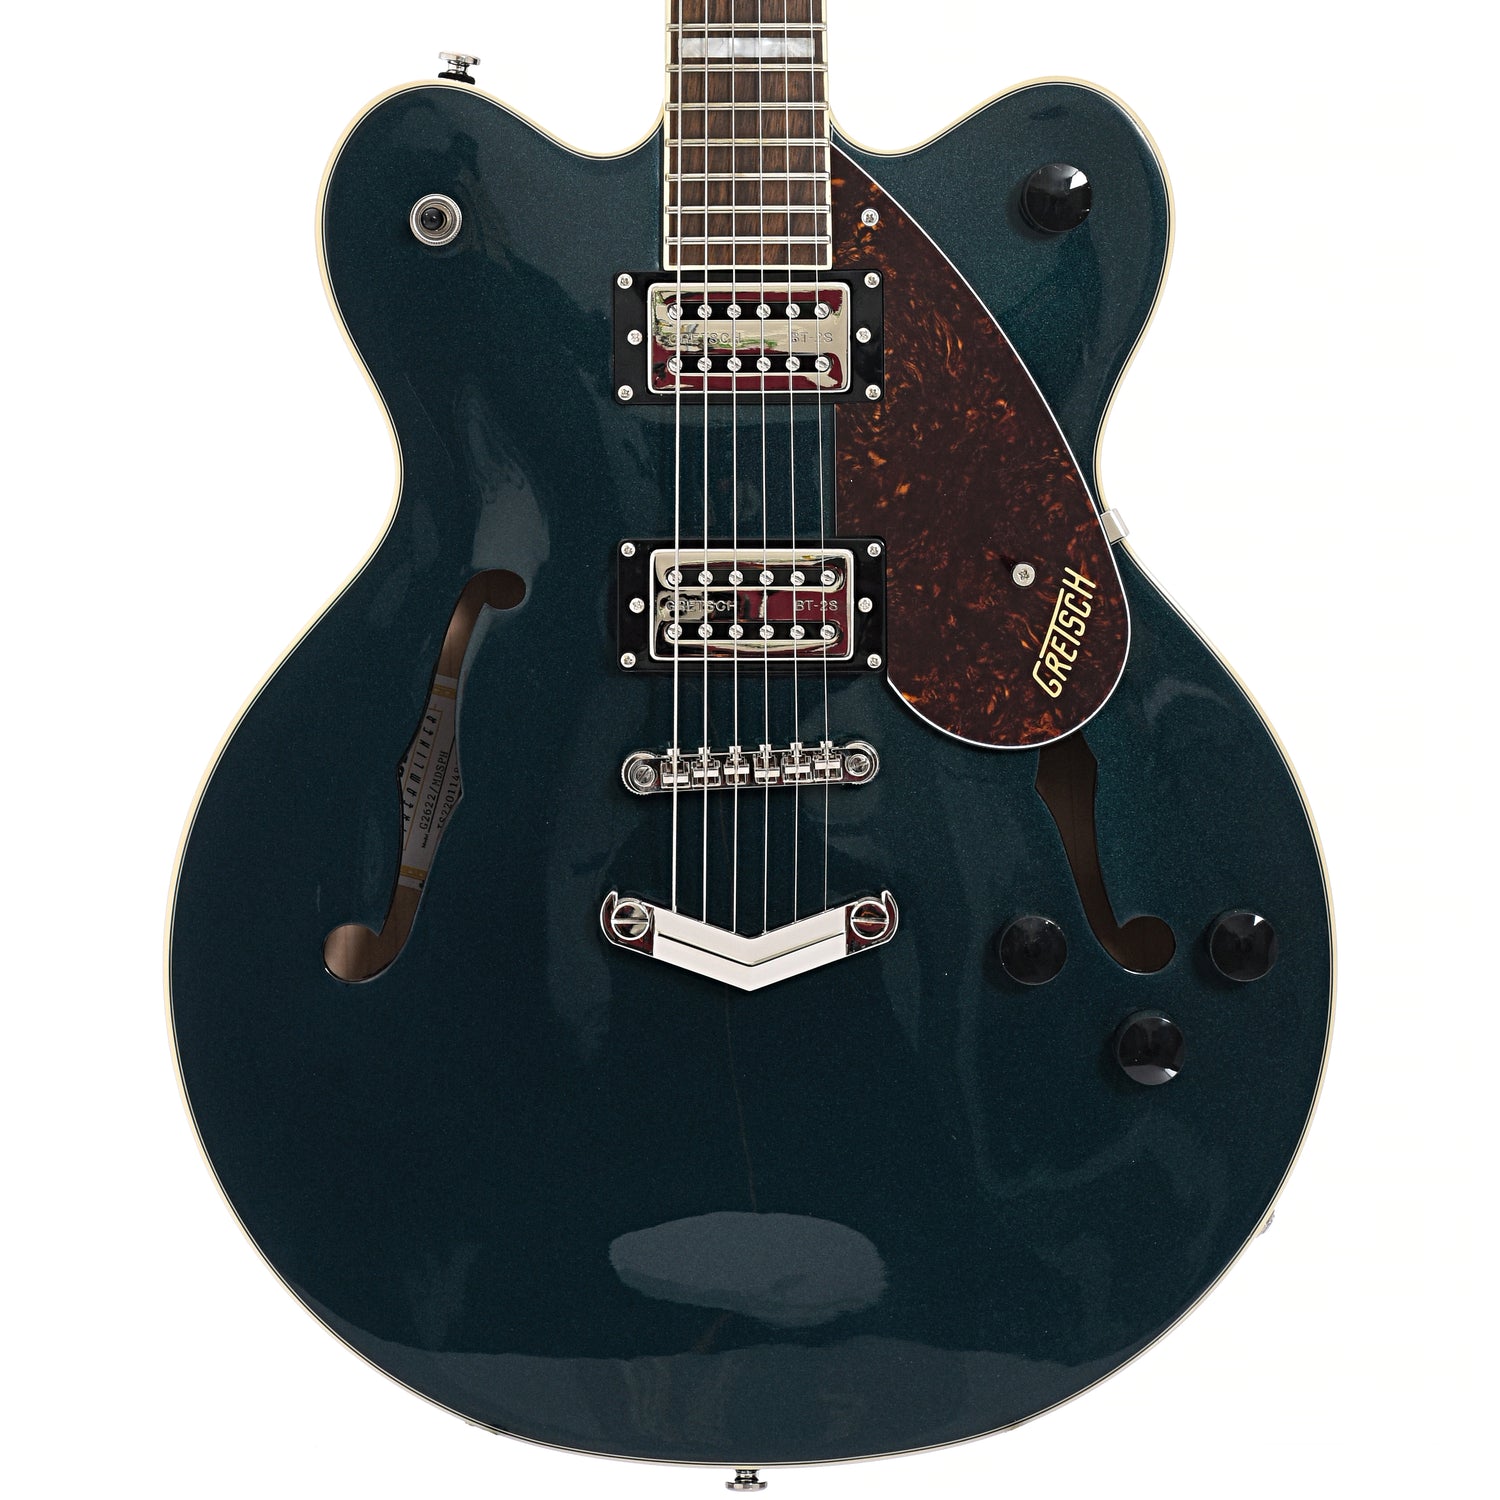 Image 2 of Gretsch G2622 Streamliner Center-Block Double Cutaway Hollow Body Guitar, Midnight Sapphire- SKU# G2622-MDSPH : Product Type Hollow Body Electric Guitars : Elderly Instruments